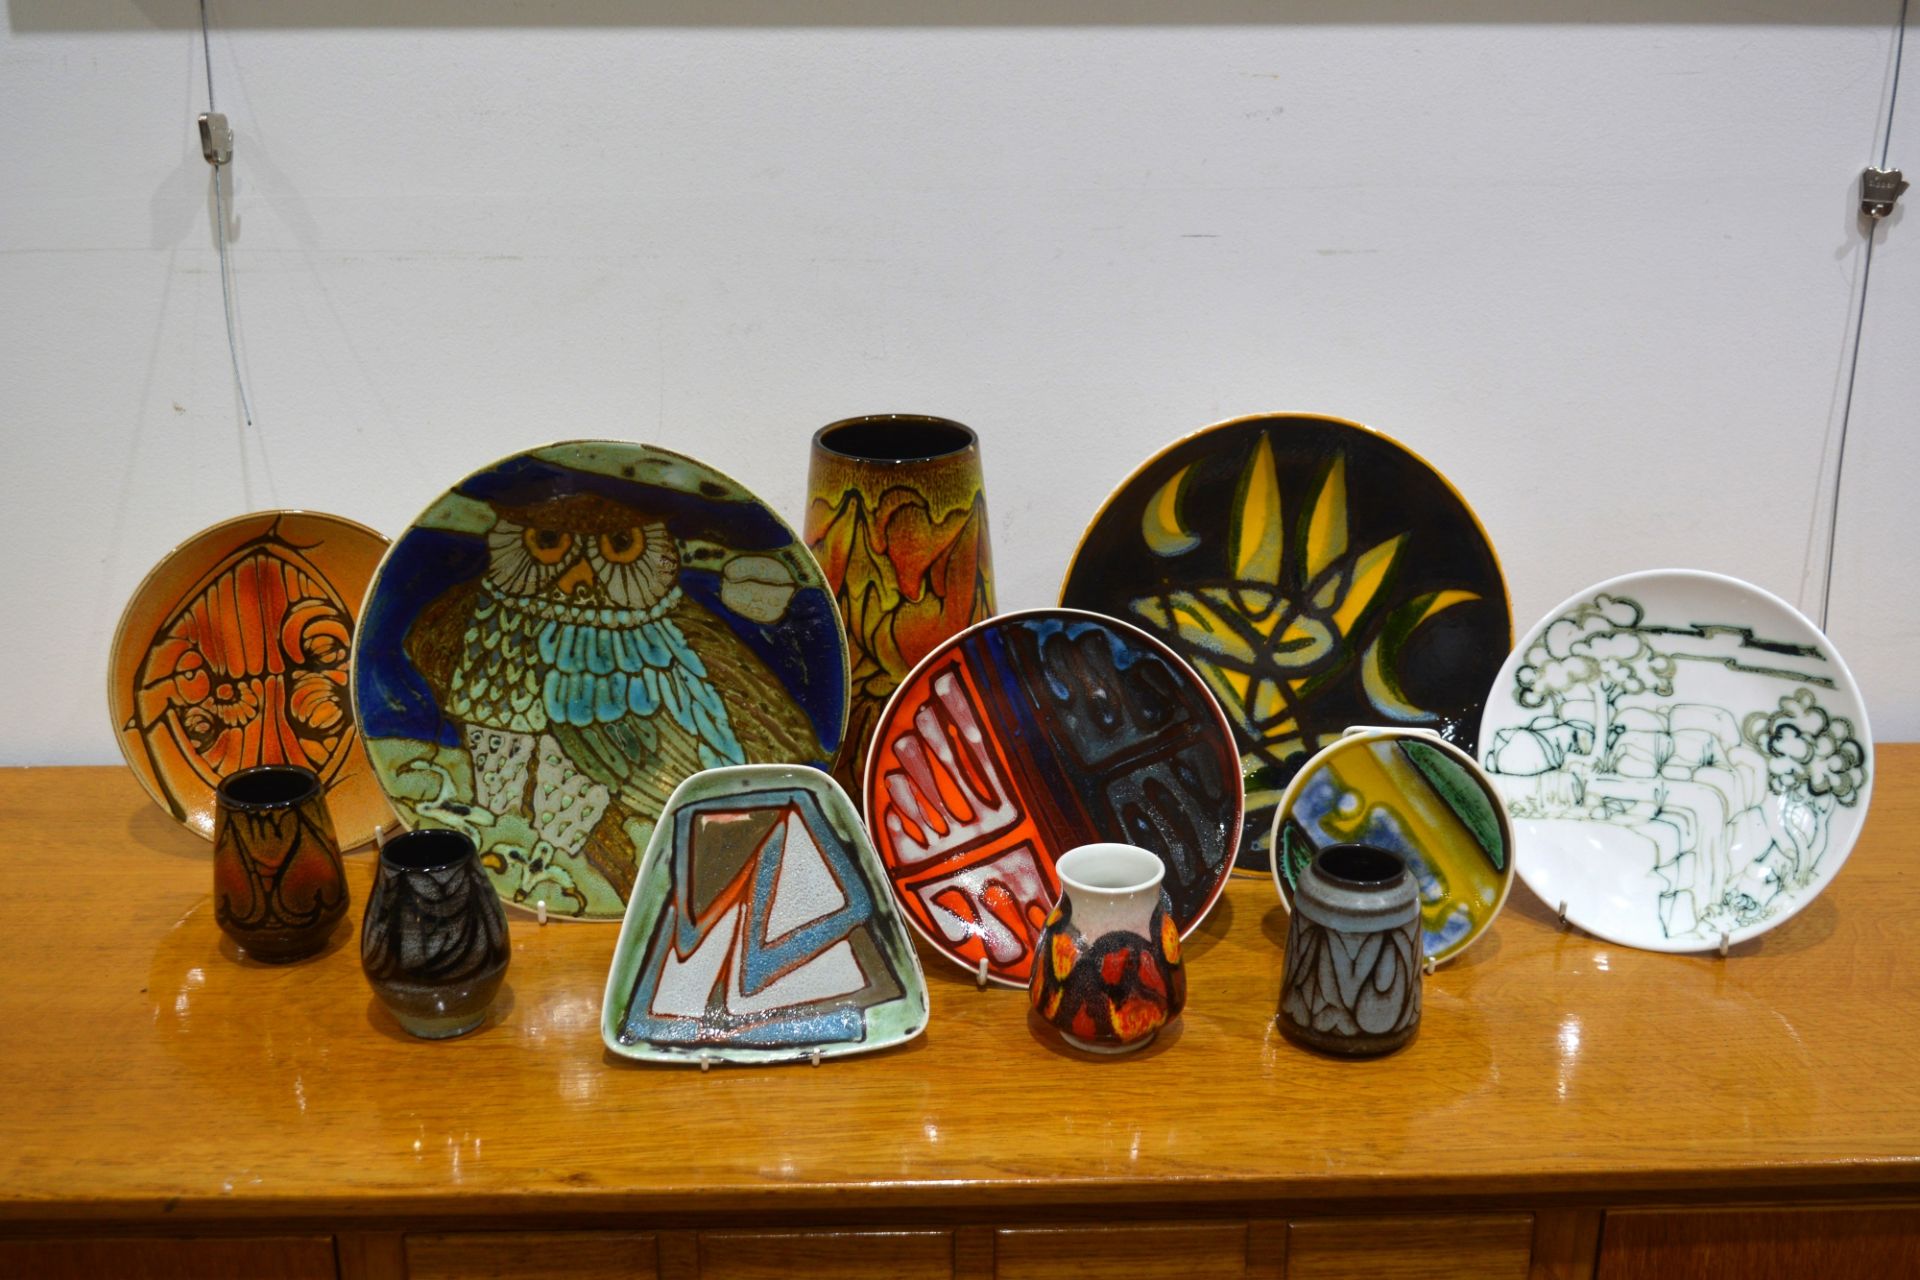 Collection of Poole Pottery to include the Aegean and Delphis range, comprising a large decorative